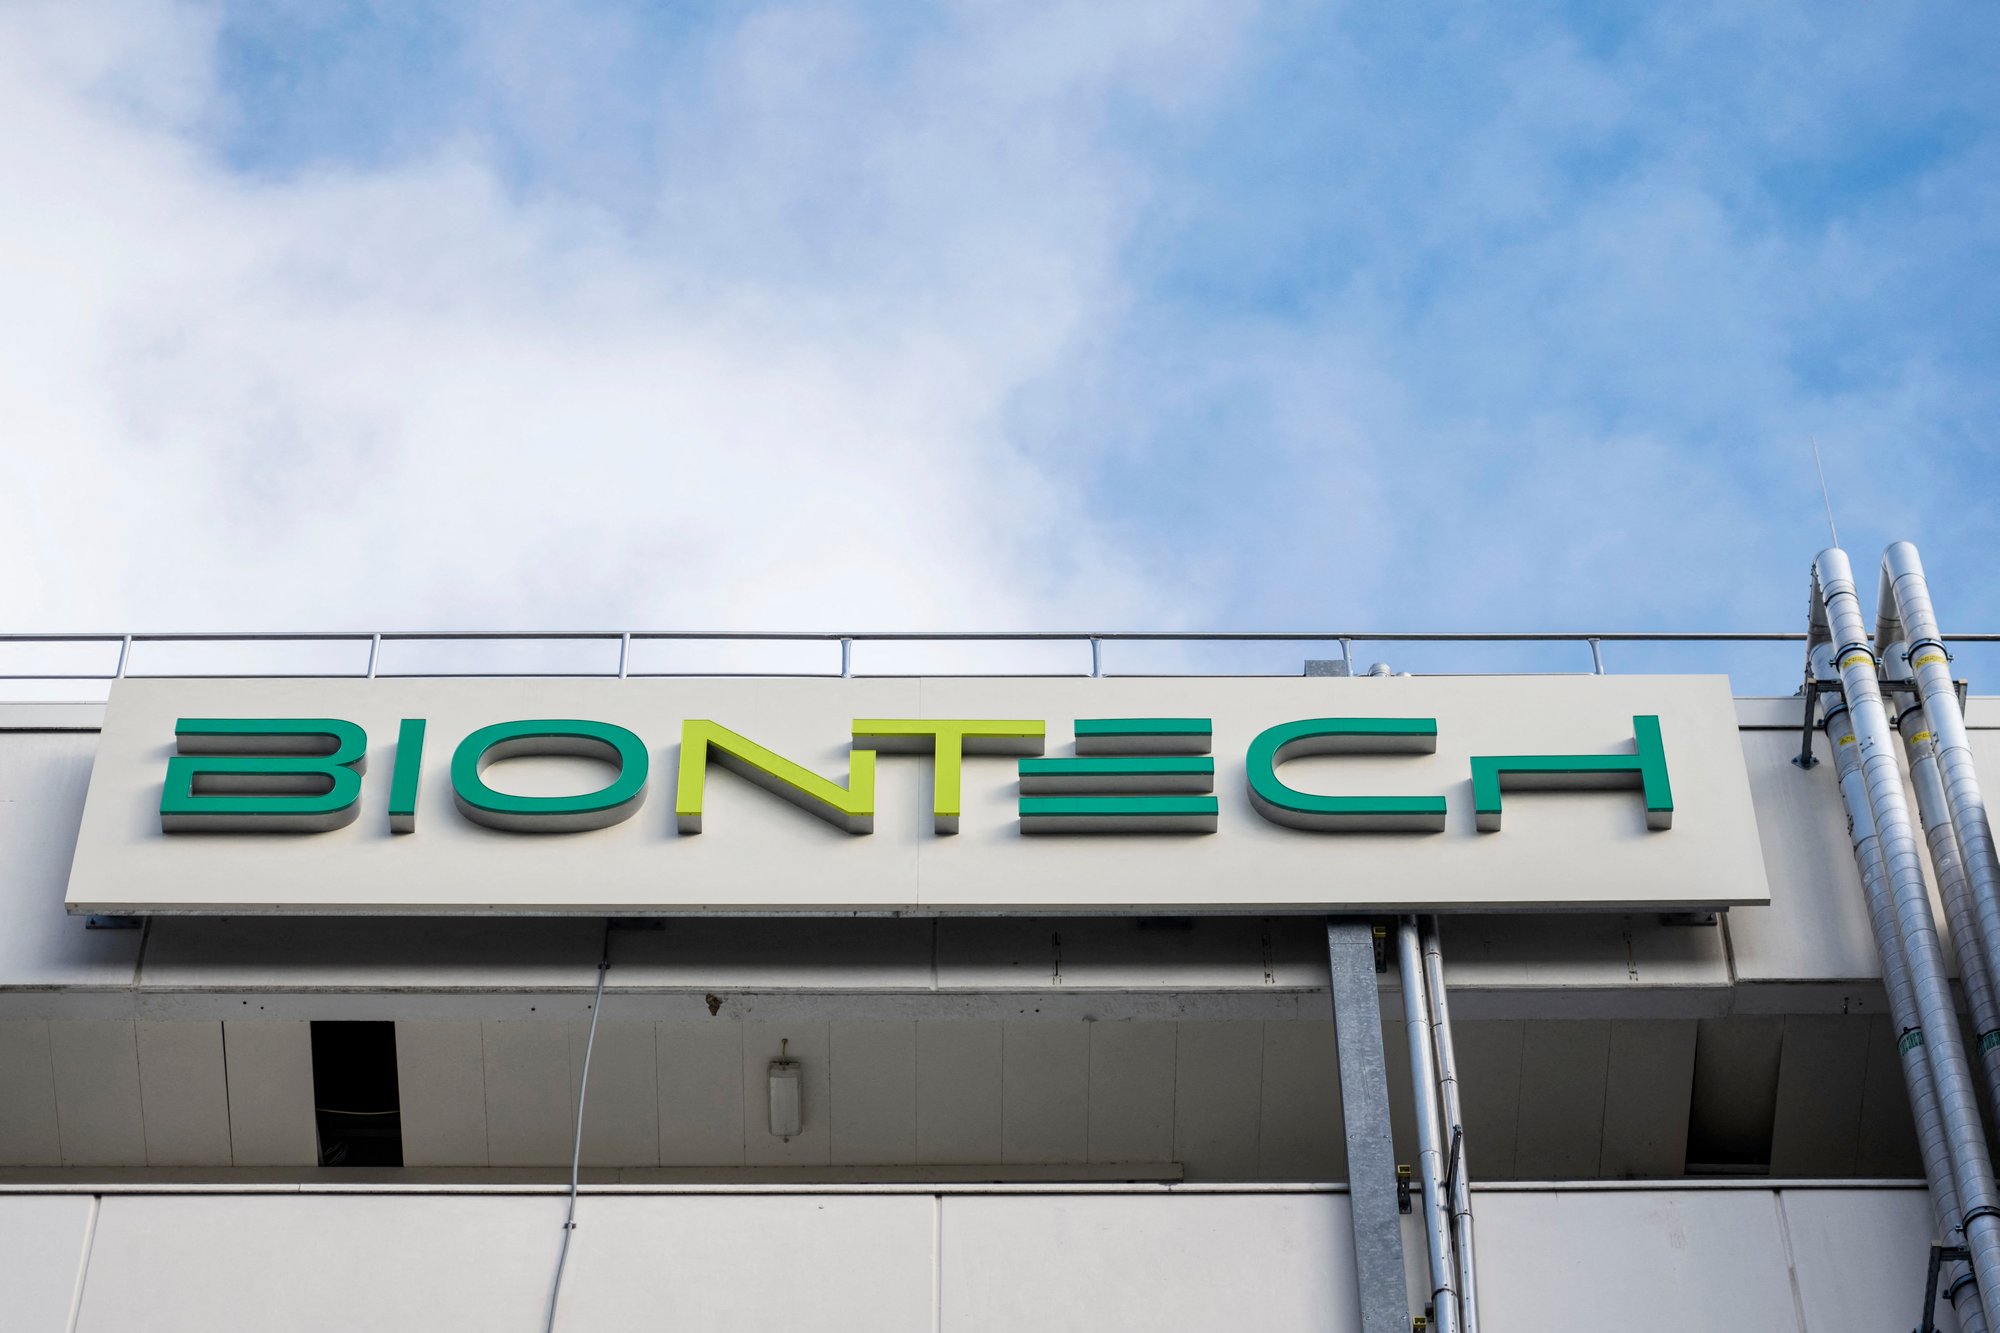 German GDP will also show how much BioNTech has made from vaccines